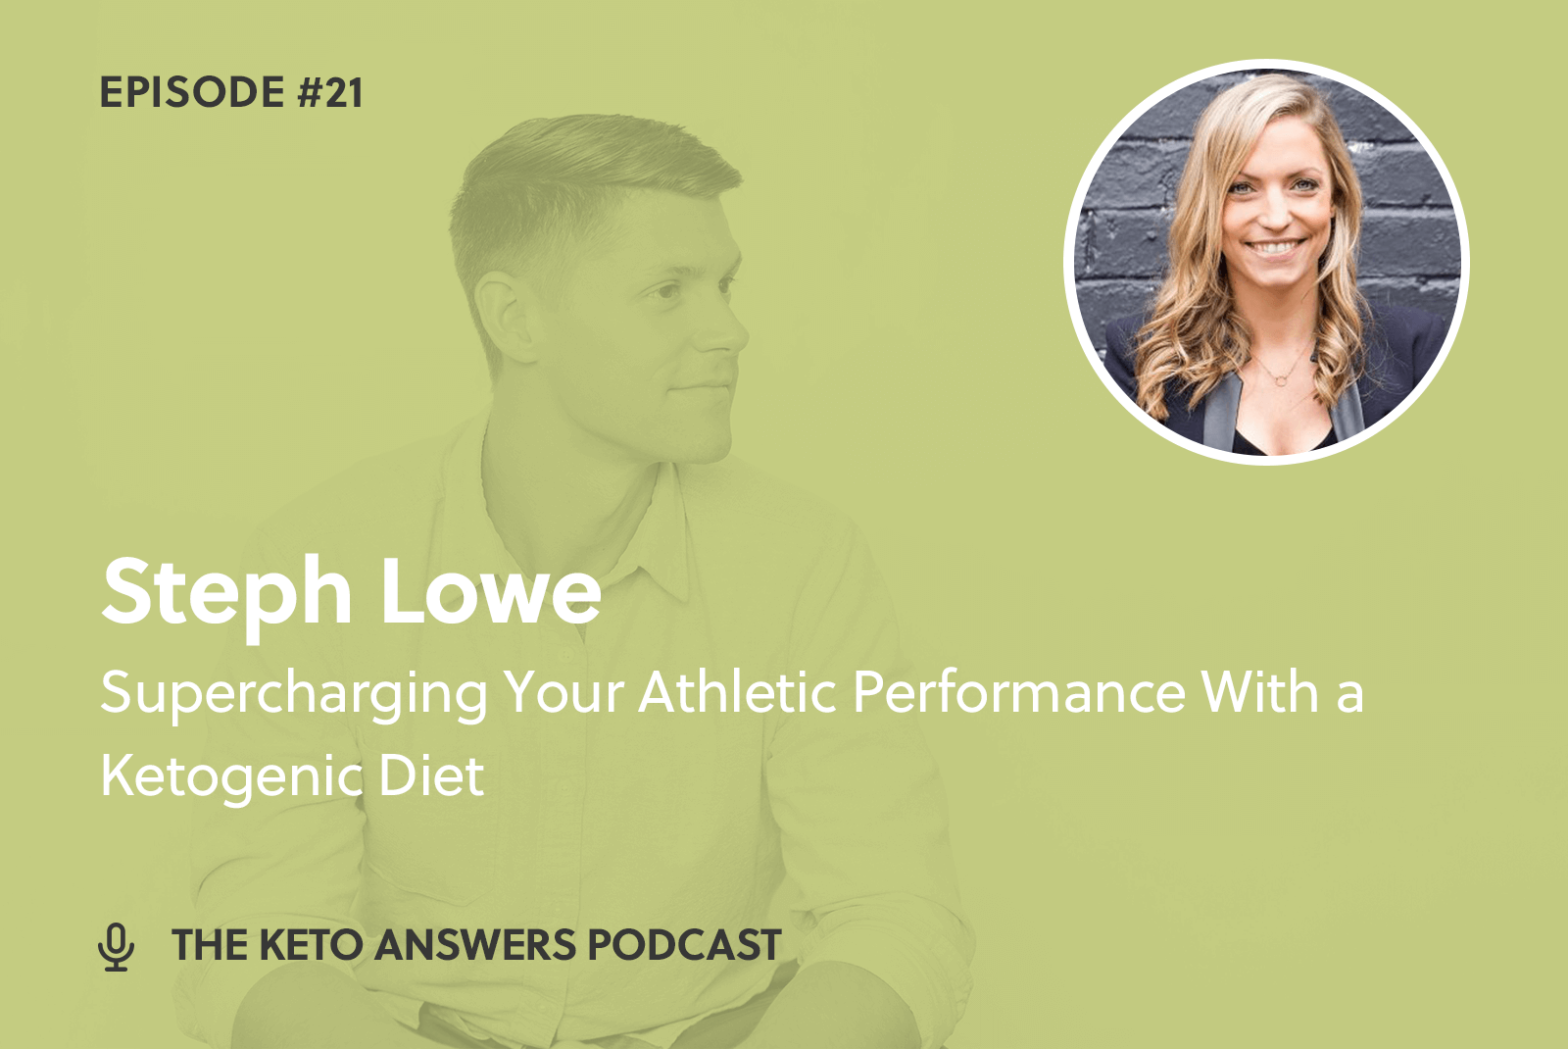 021: Supercharging Your Athletic Performance With a Ketogenic Diet - Steph Lowe